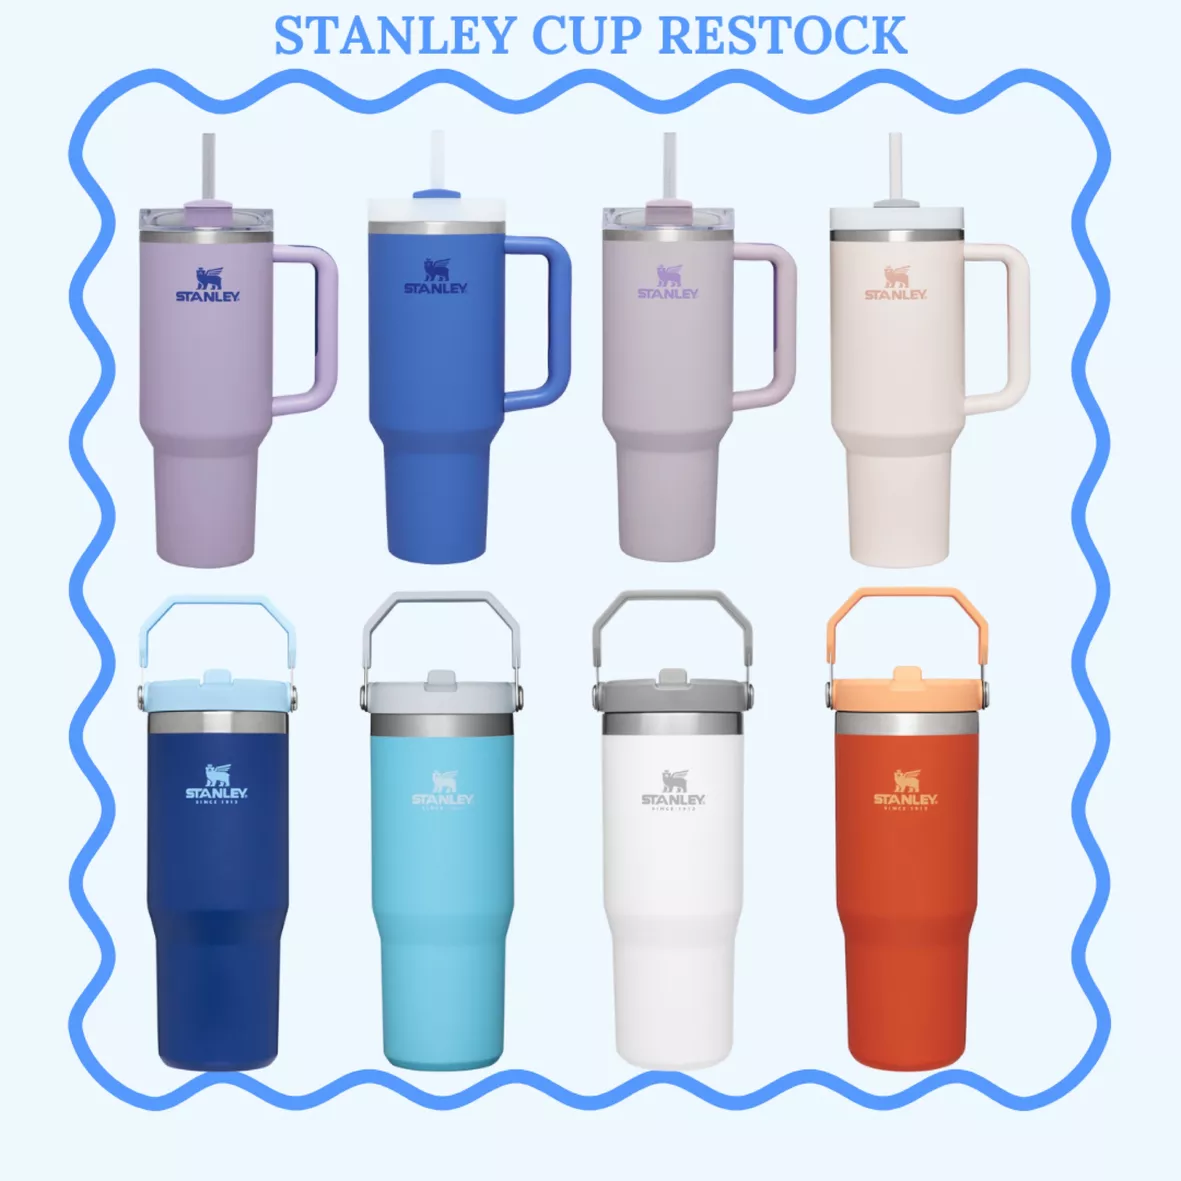 The IceFlow Flip Straw Tumbler curated on LTK in 2023  Tumbler with straw,  Christmas wishlist, Christmas list